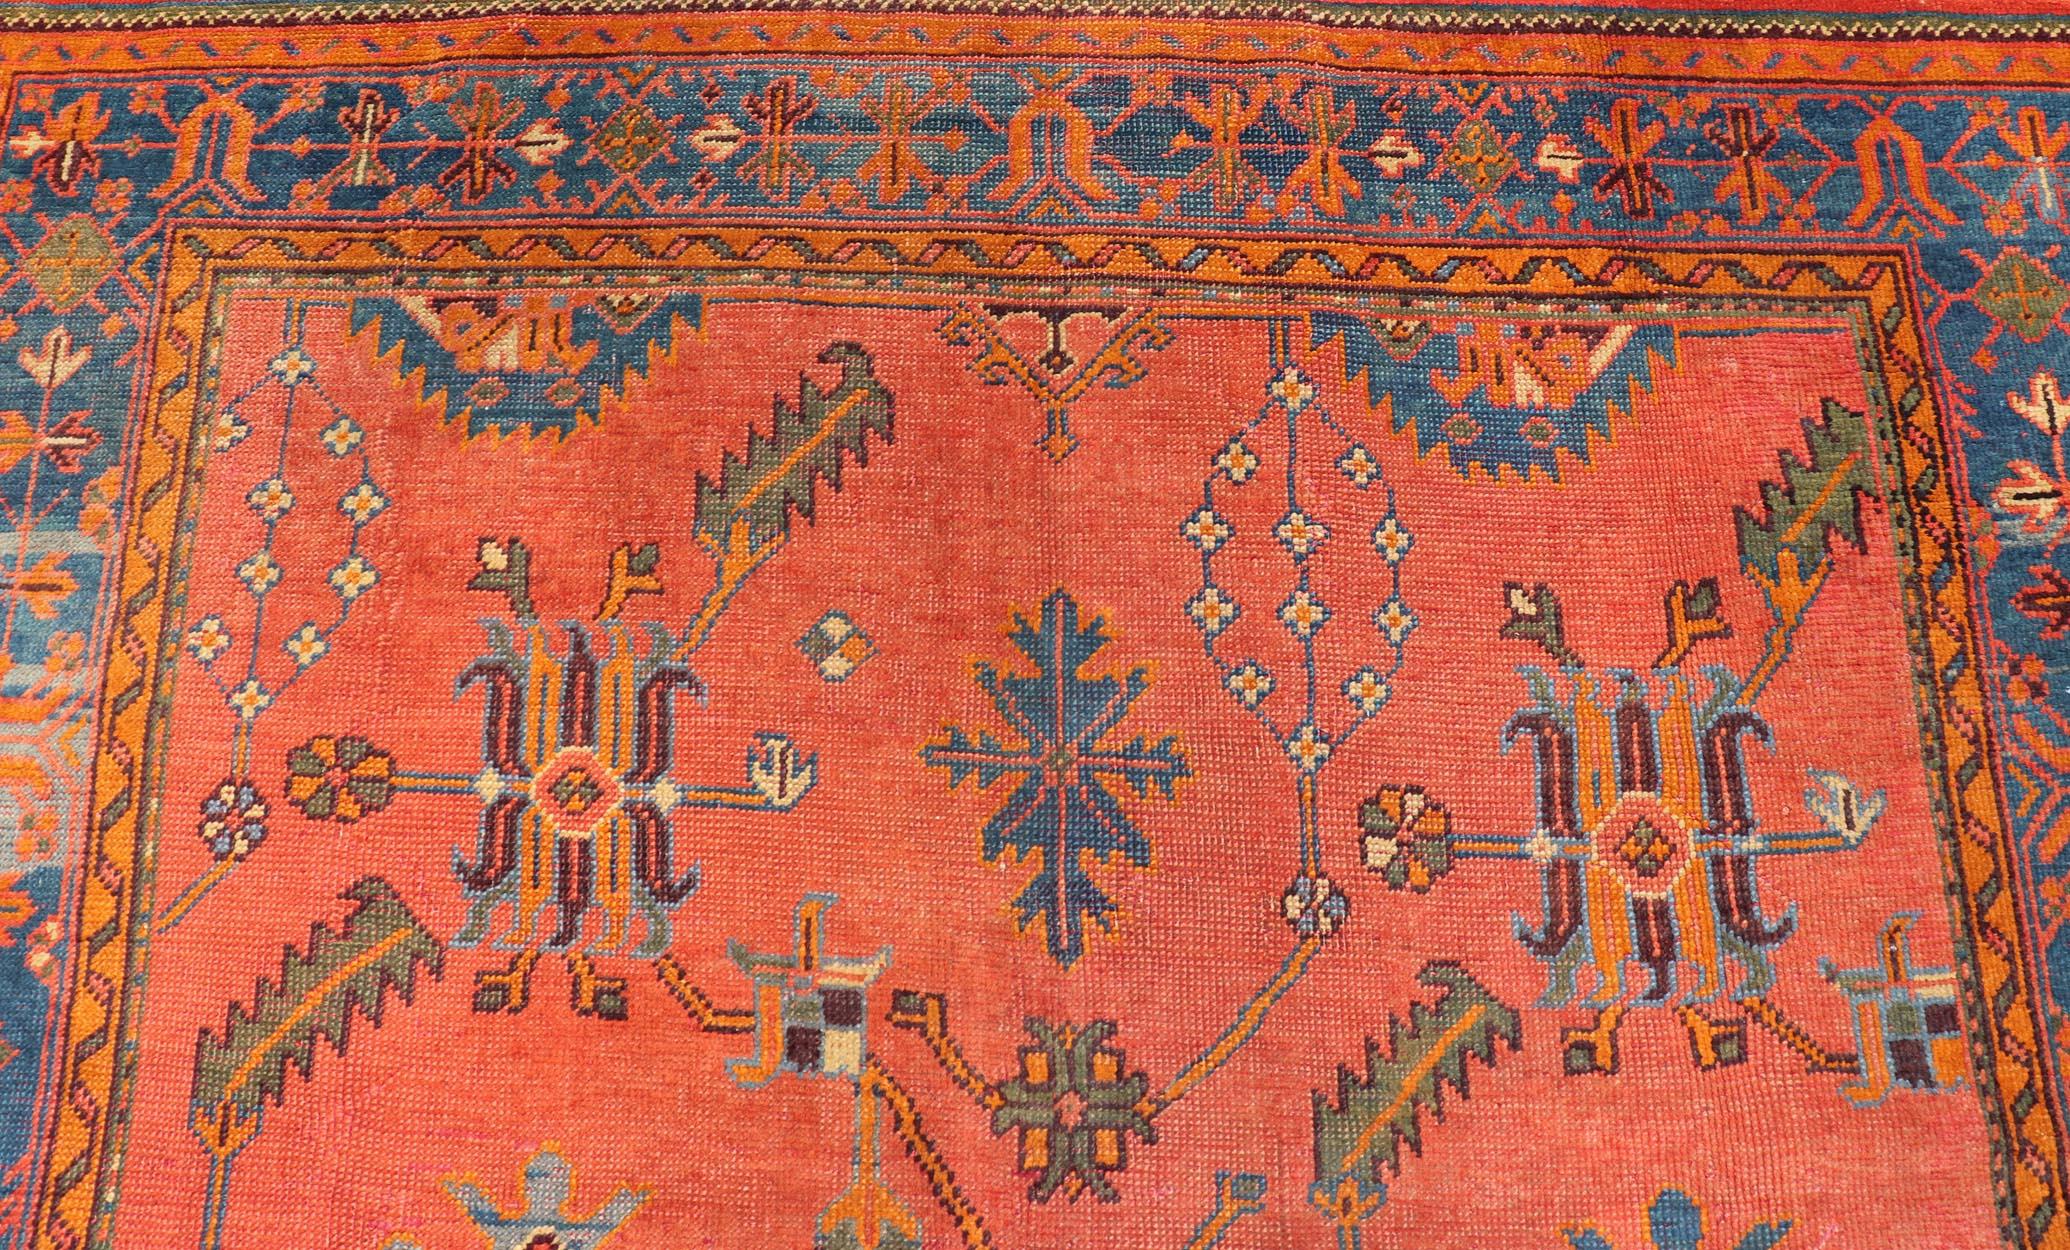 Wool Antique Turkish Oushak Colorful Rug With All-Over Design In Salmon and Blue's  For Sale